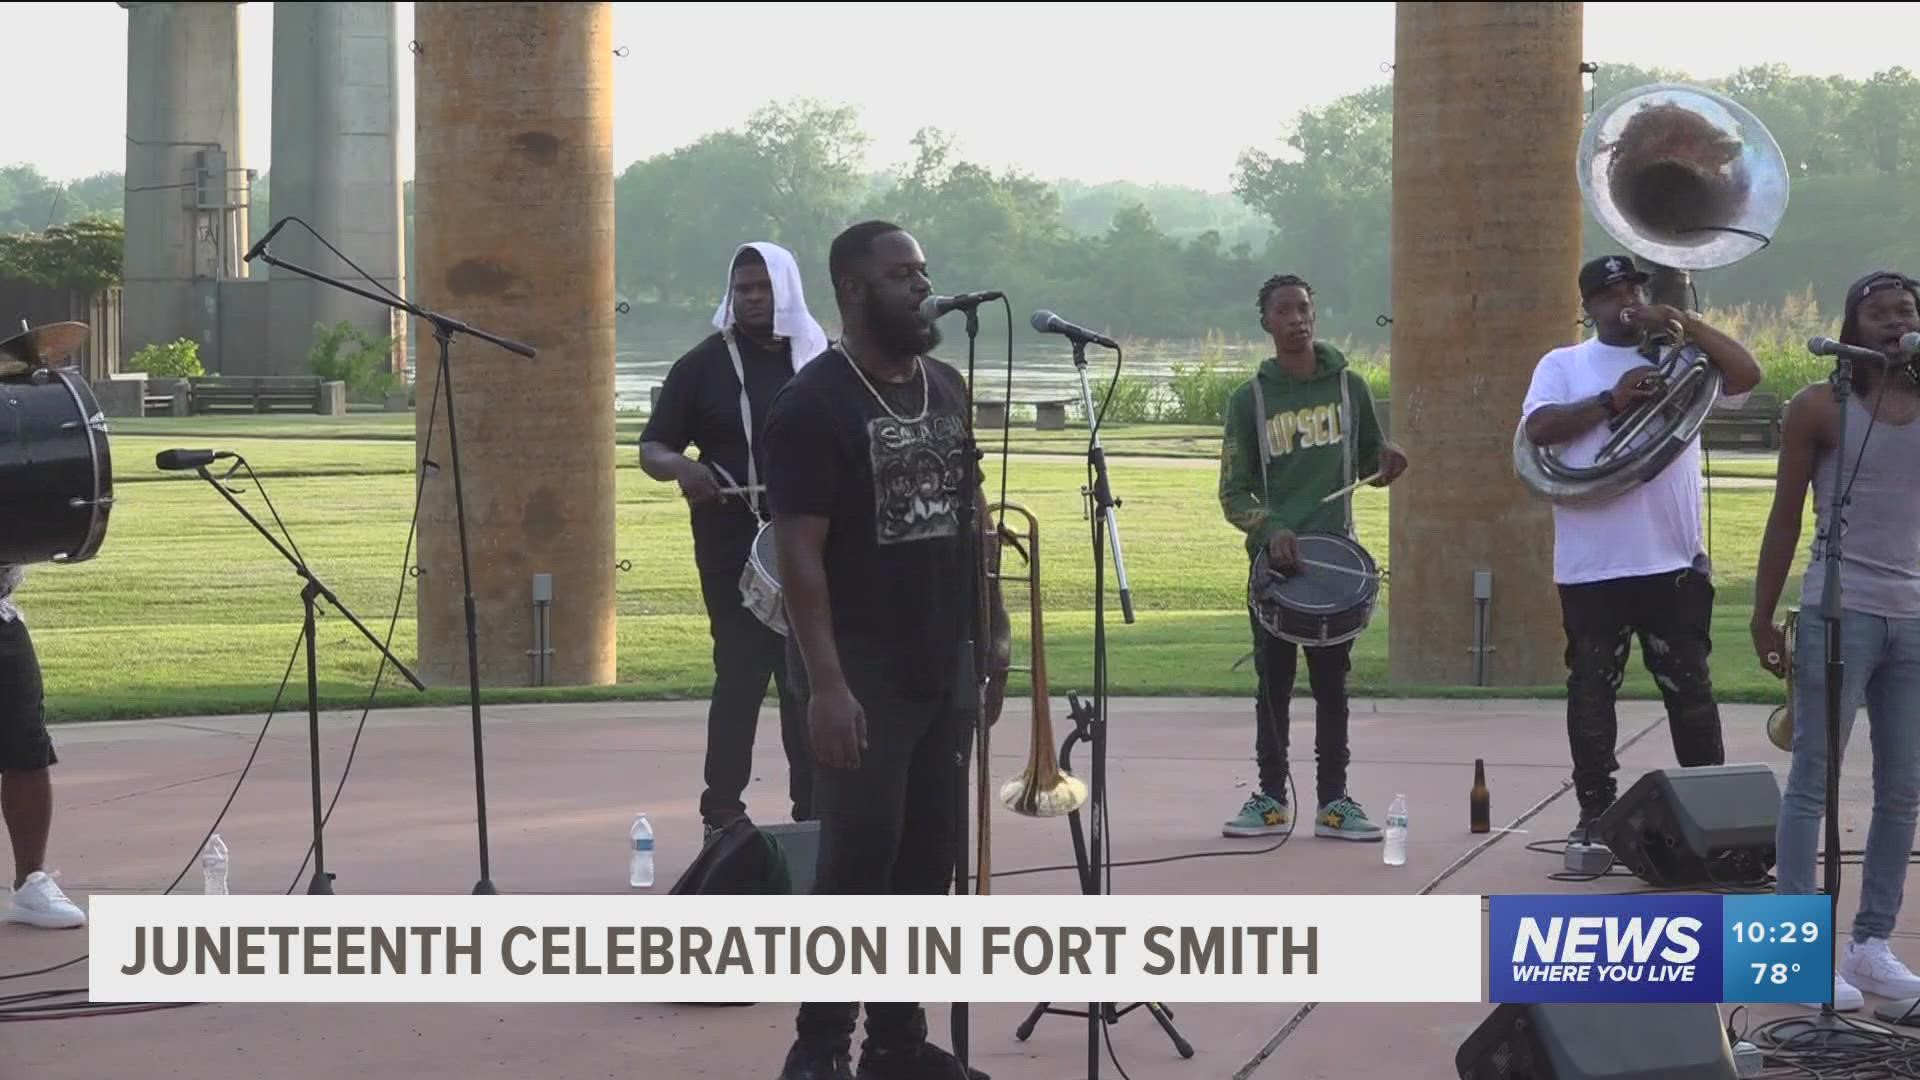 To celebrate Juneteenth, hundreds of people gathered at the Riverfront Amphitheater for a live music event hosted by 64.6 Downtown and the Fort Smith Round Table.